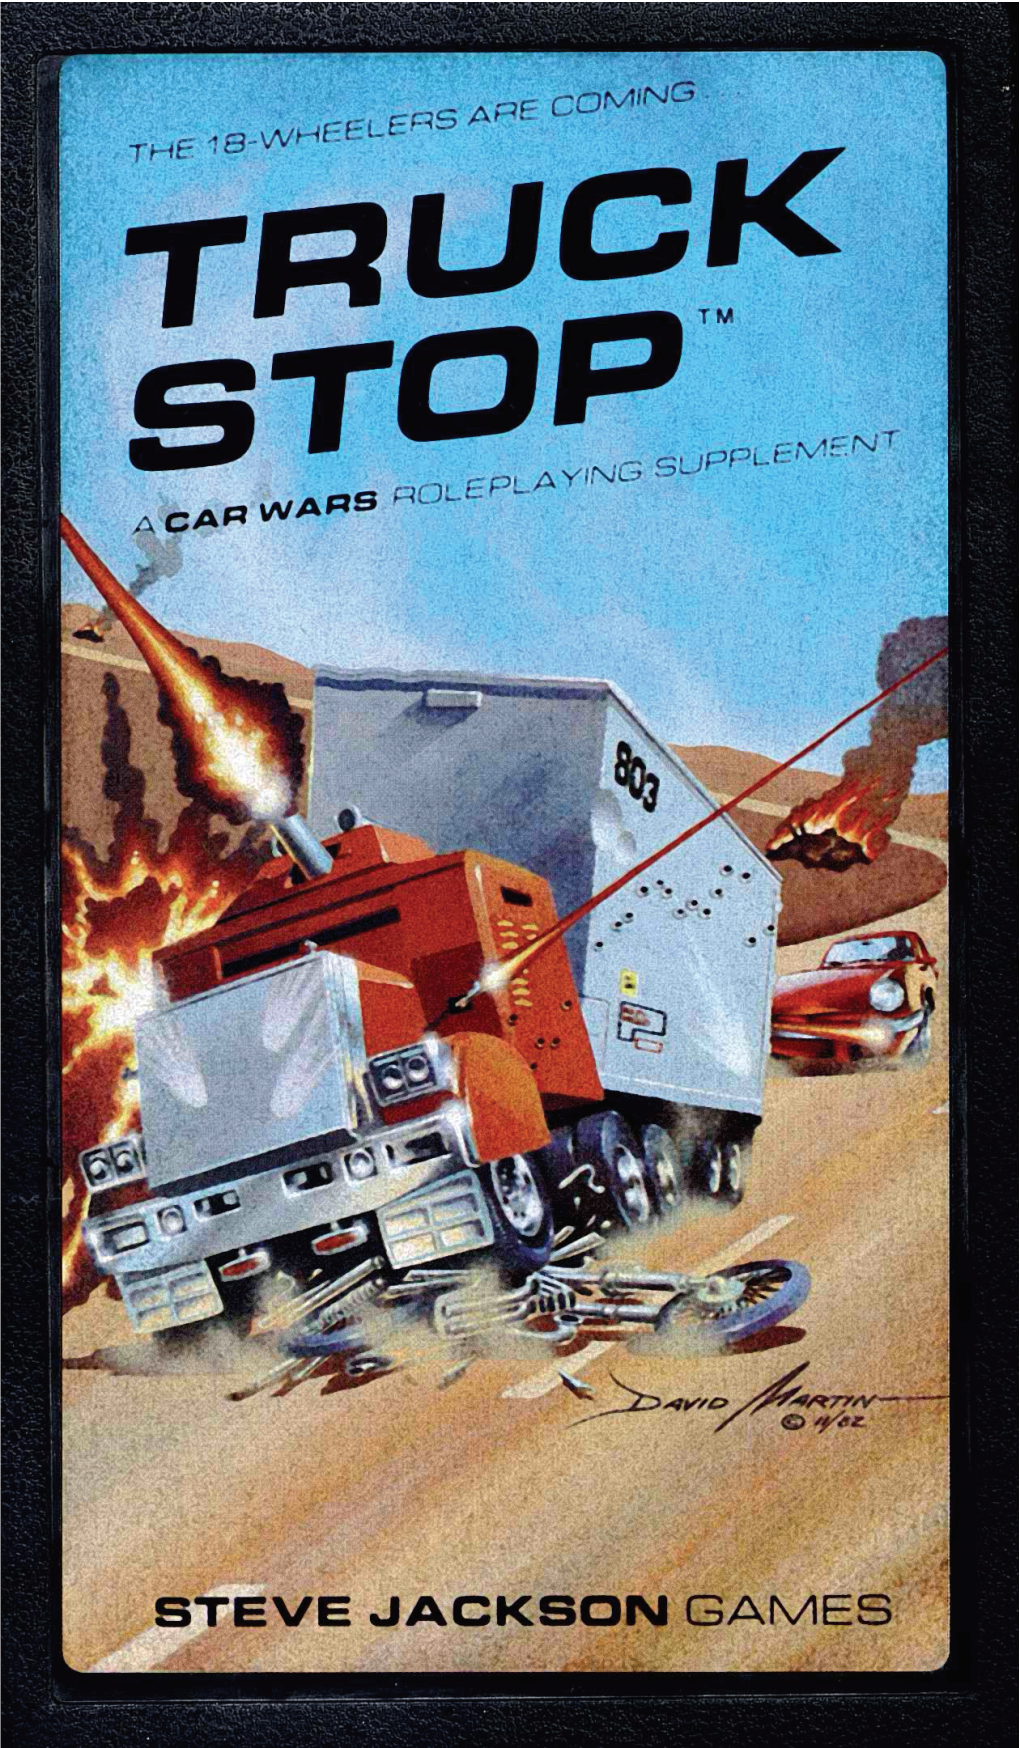 Car Wars Truck Stop Is Copyright © 1983 by Steve Jackson Games Incorporated